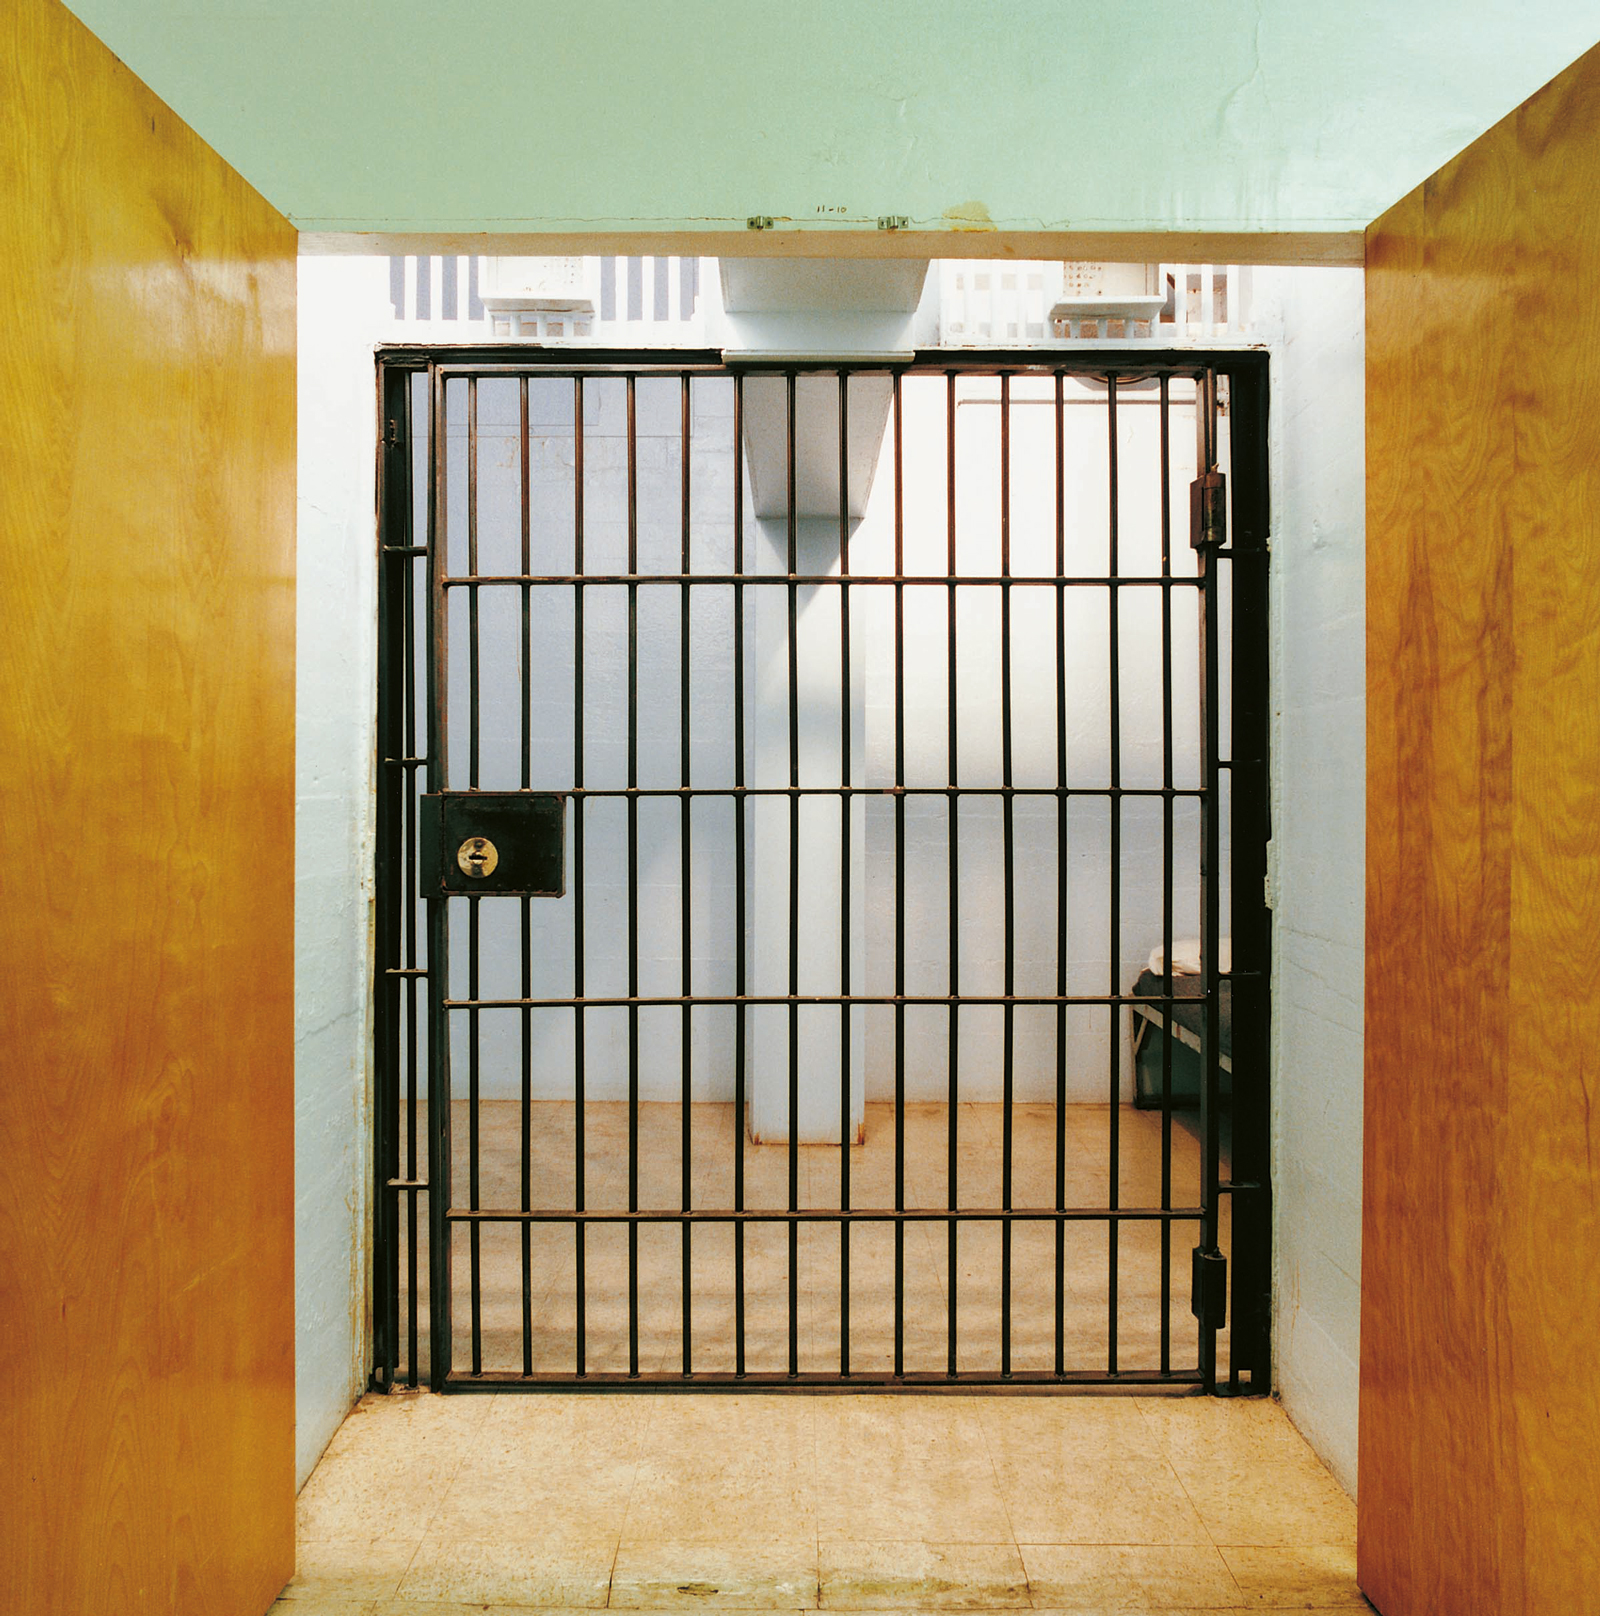 delvin / Final Holding Cell, Indiana State Prison 